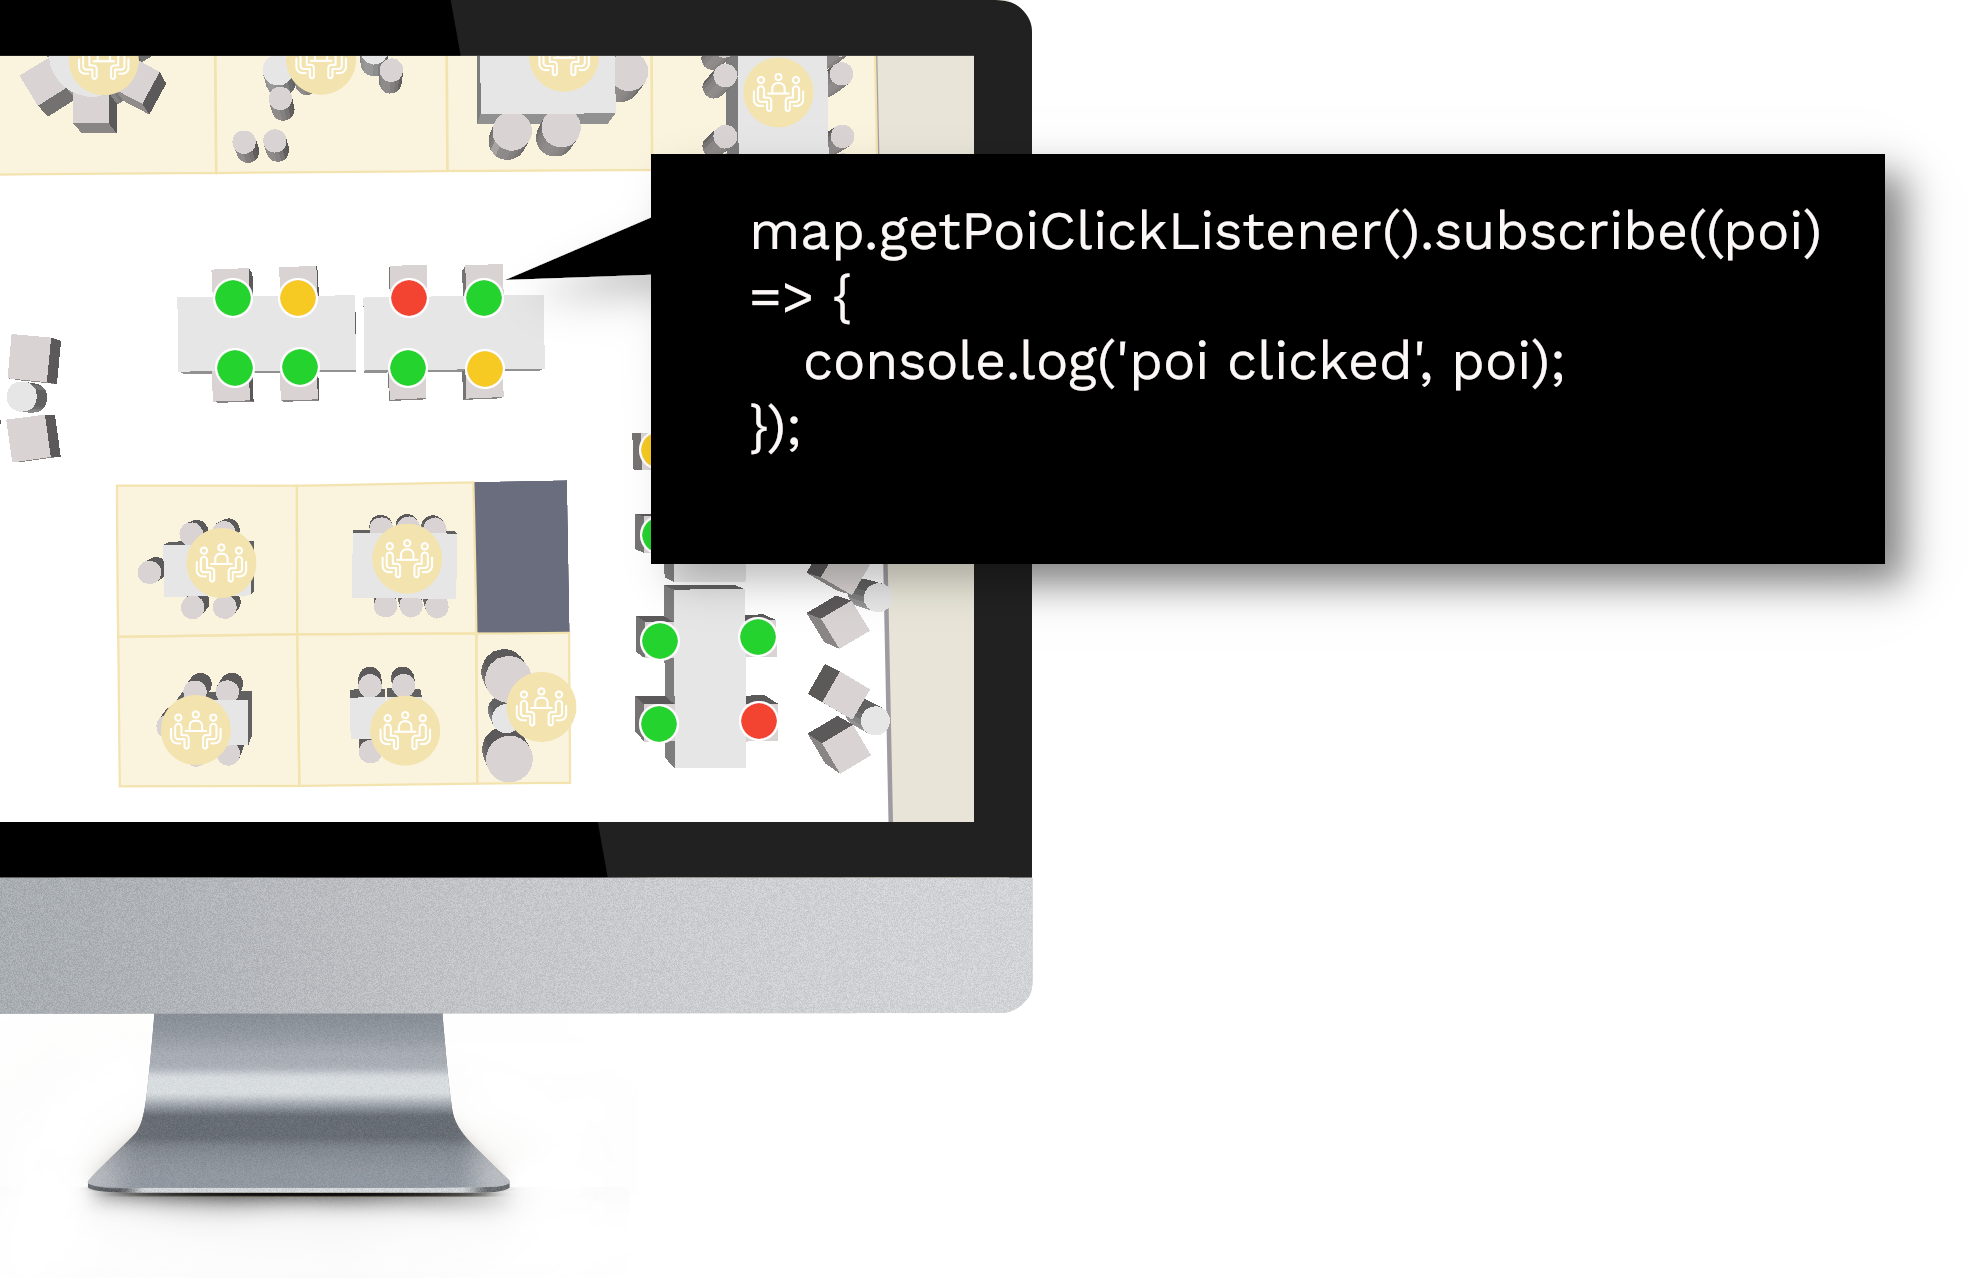 Picture showing an indoor floor plan and an PoiClickListener